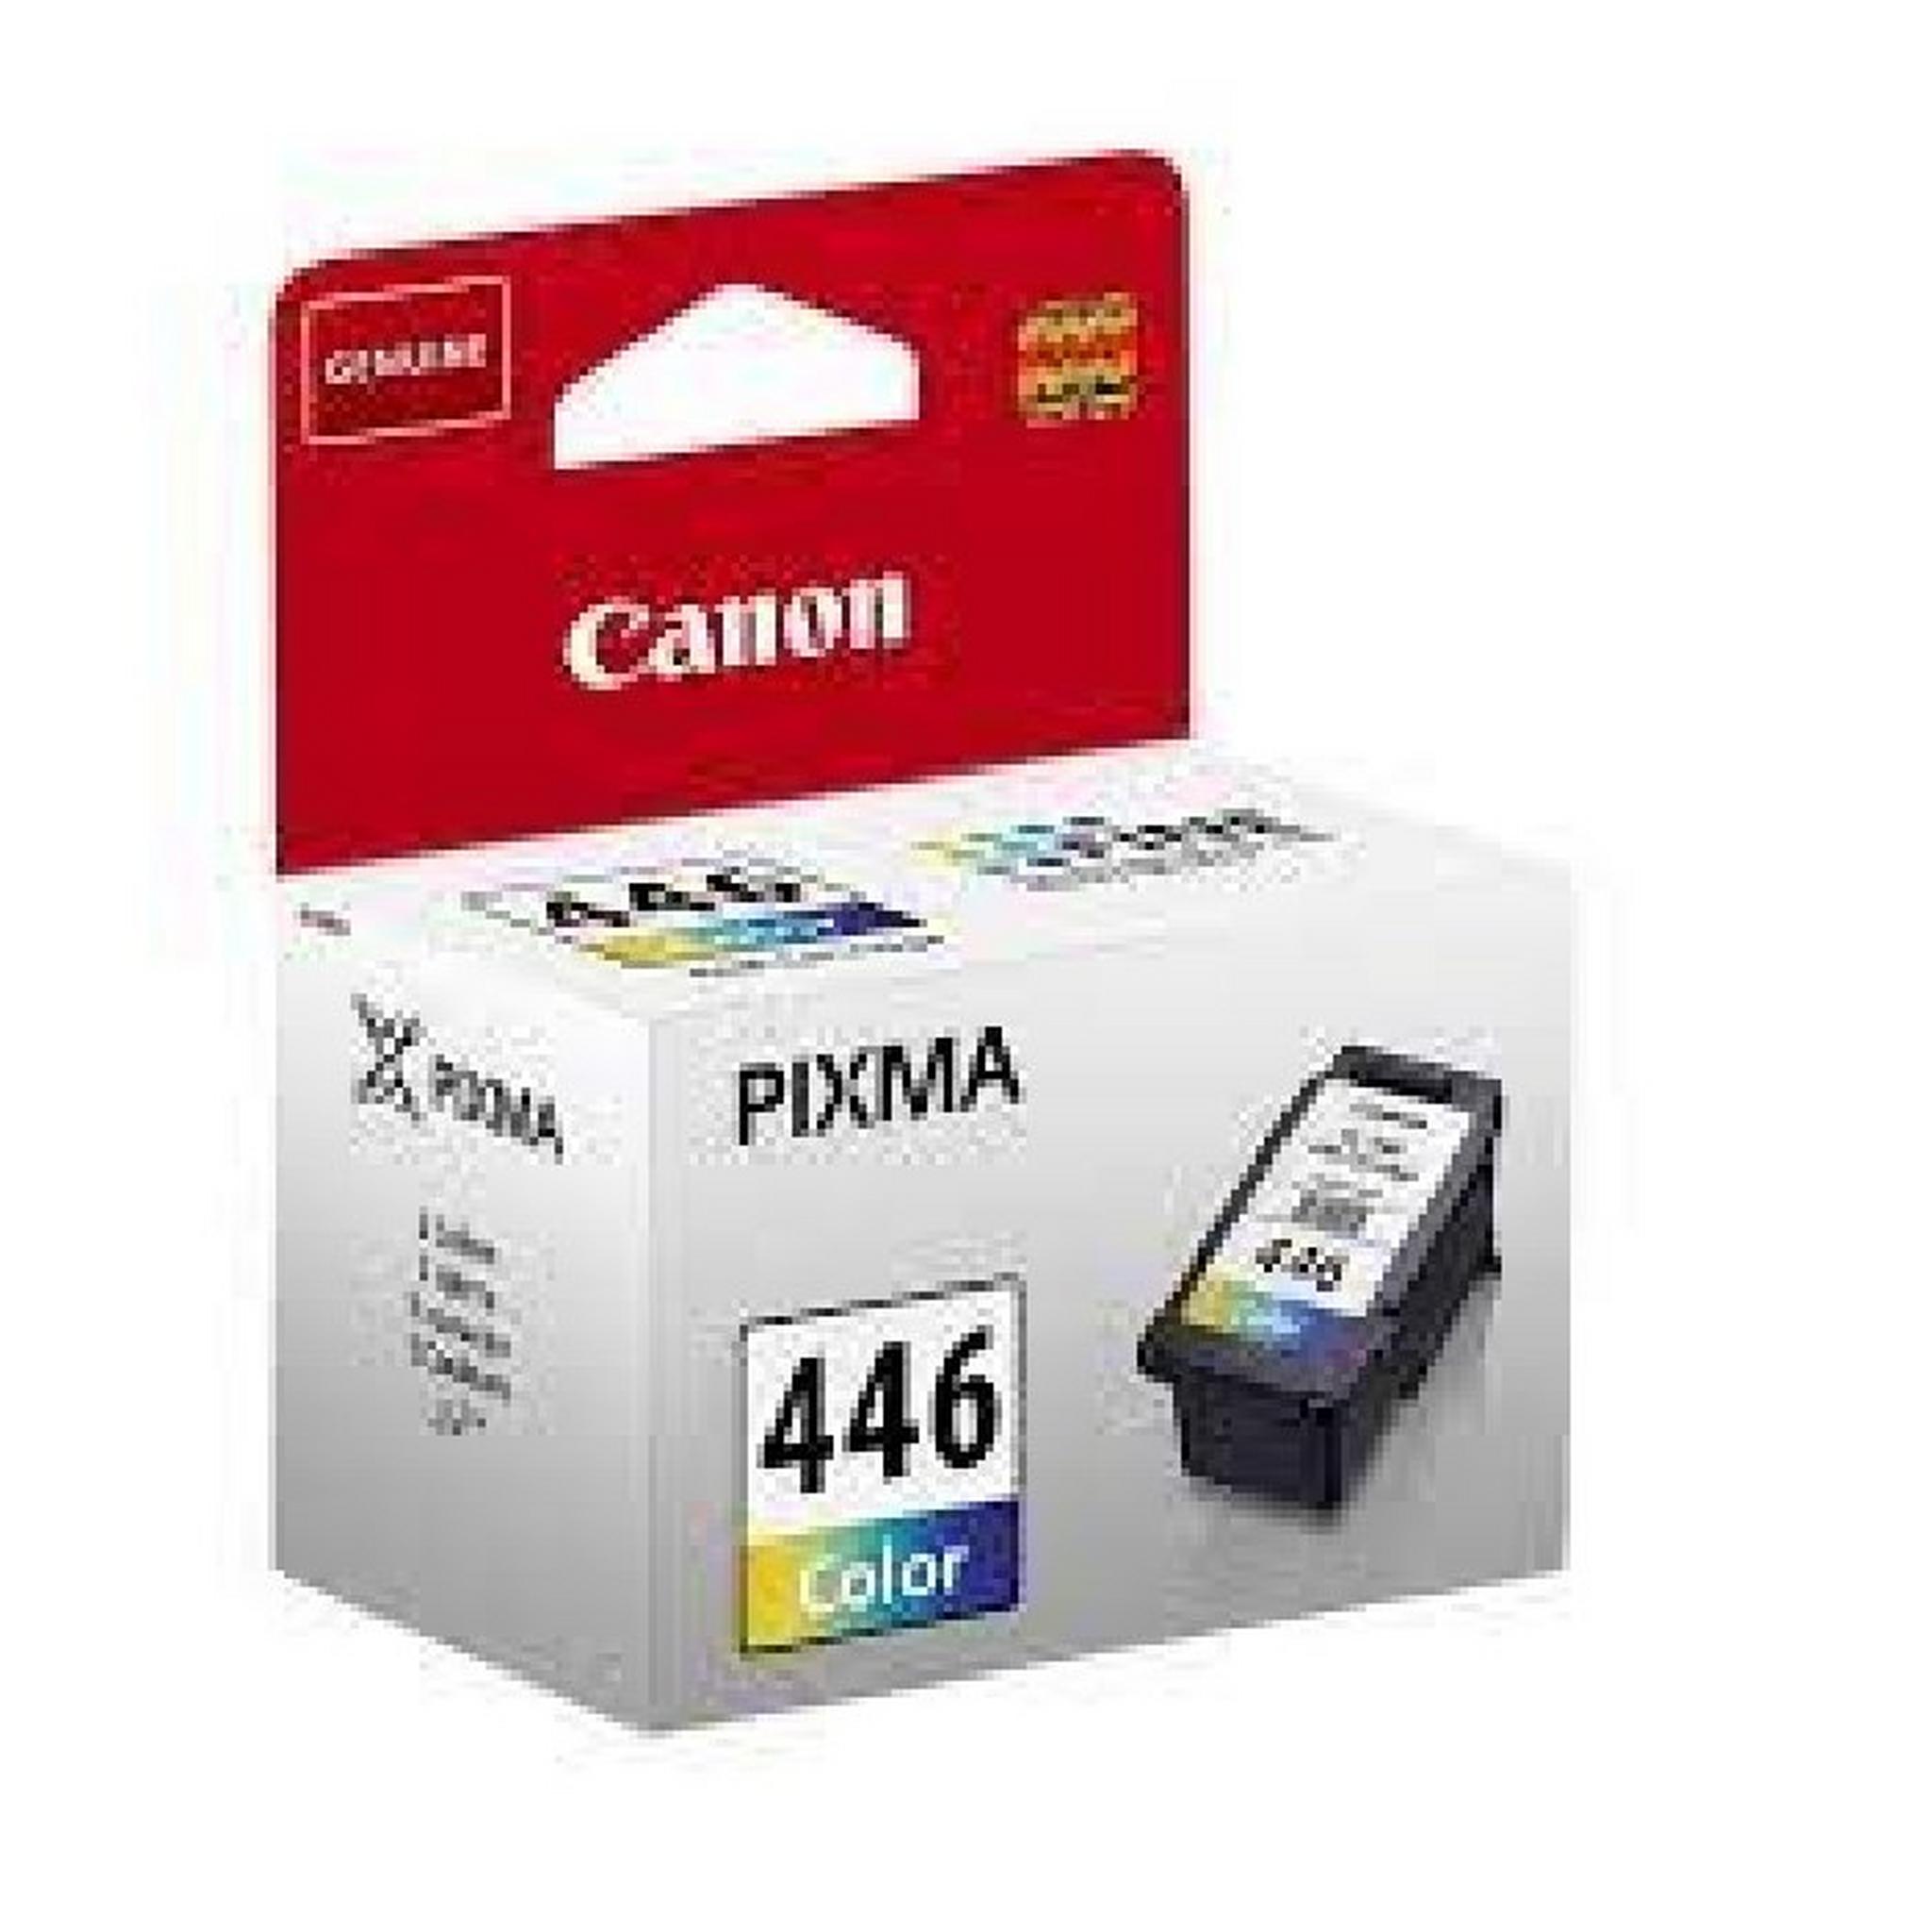 CANON Ink 446 for Inkjet Printing 180 Page Yield - CMY (Tri Colour Pack)